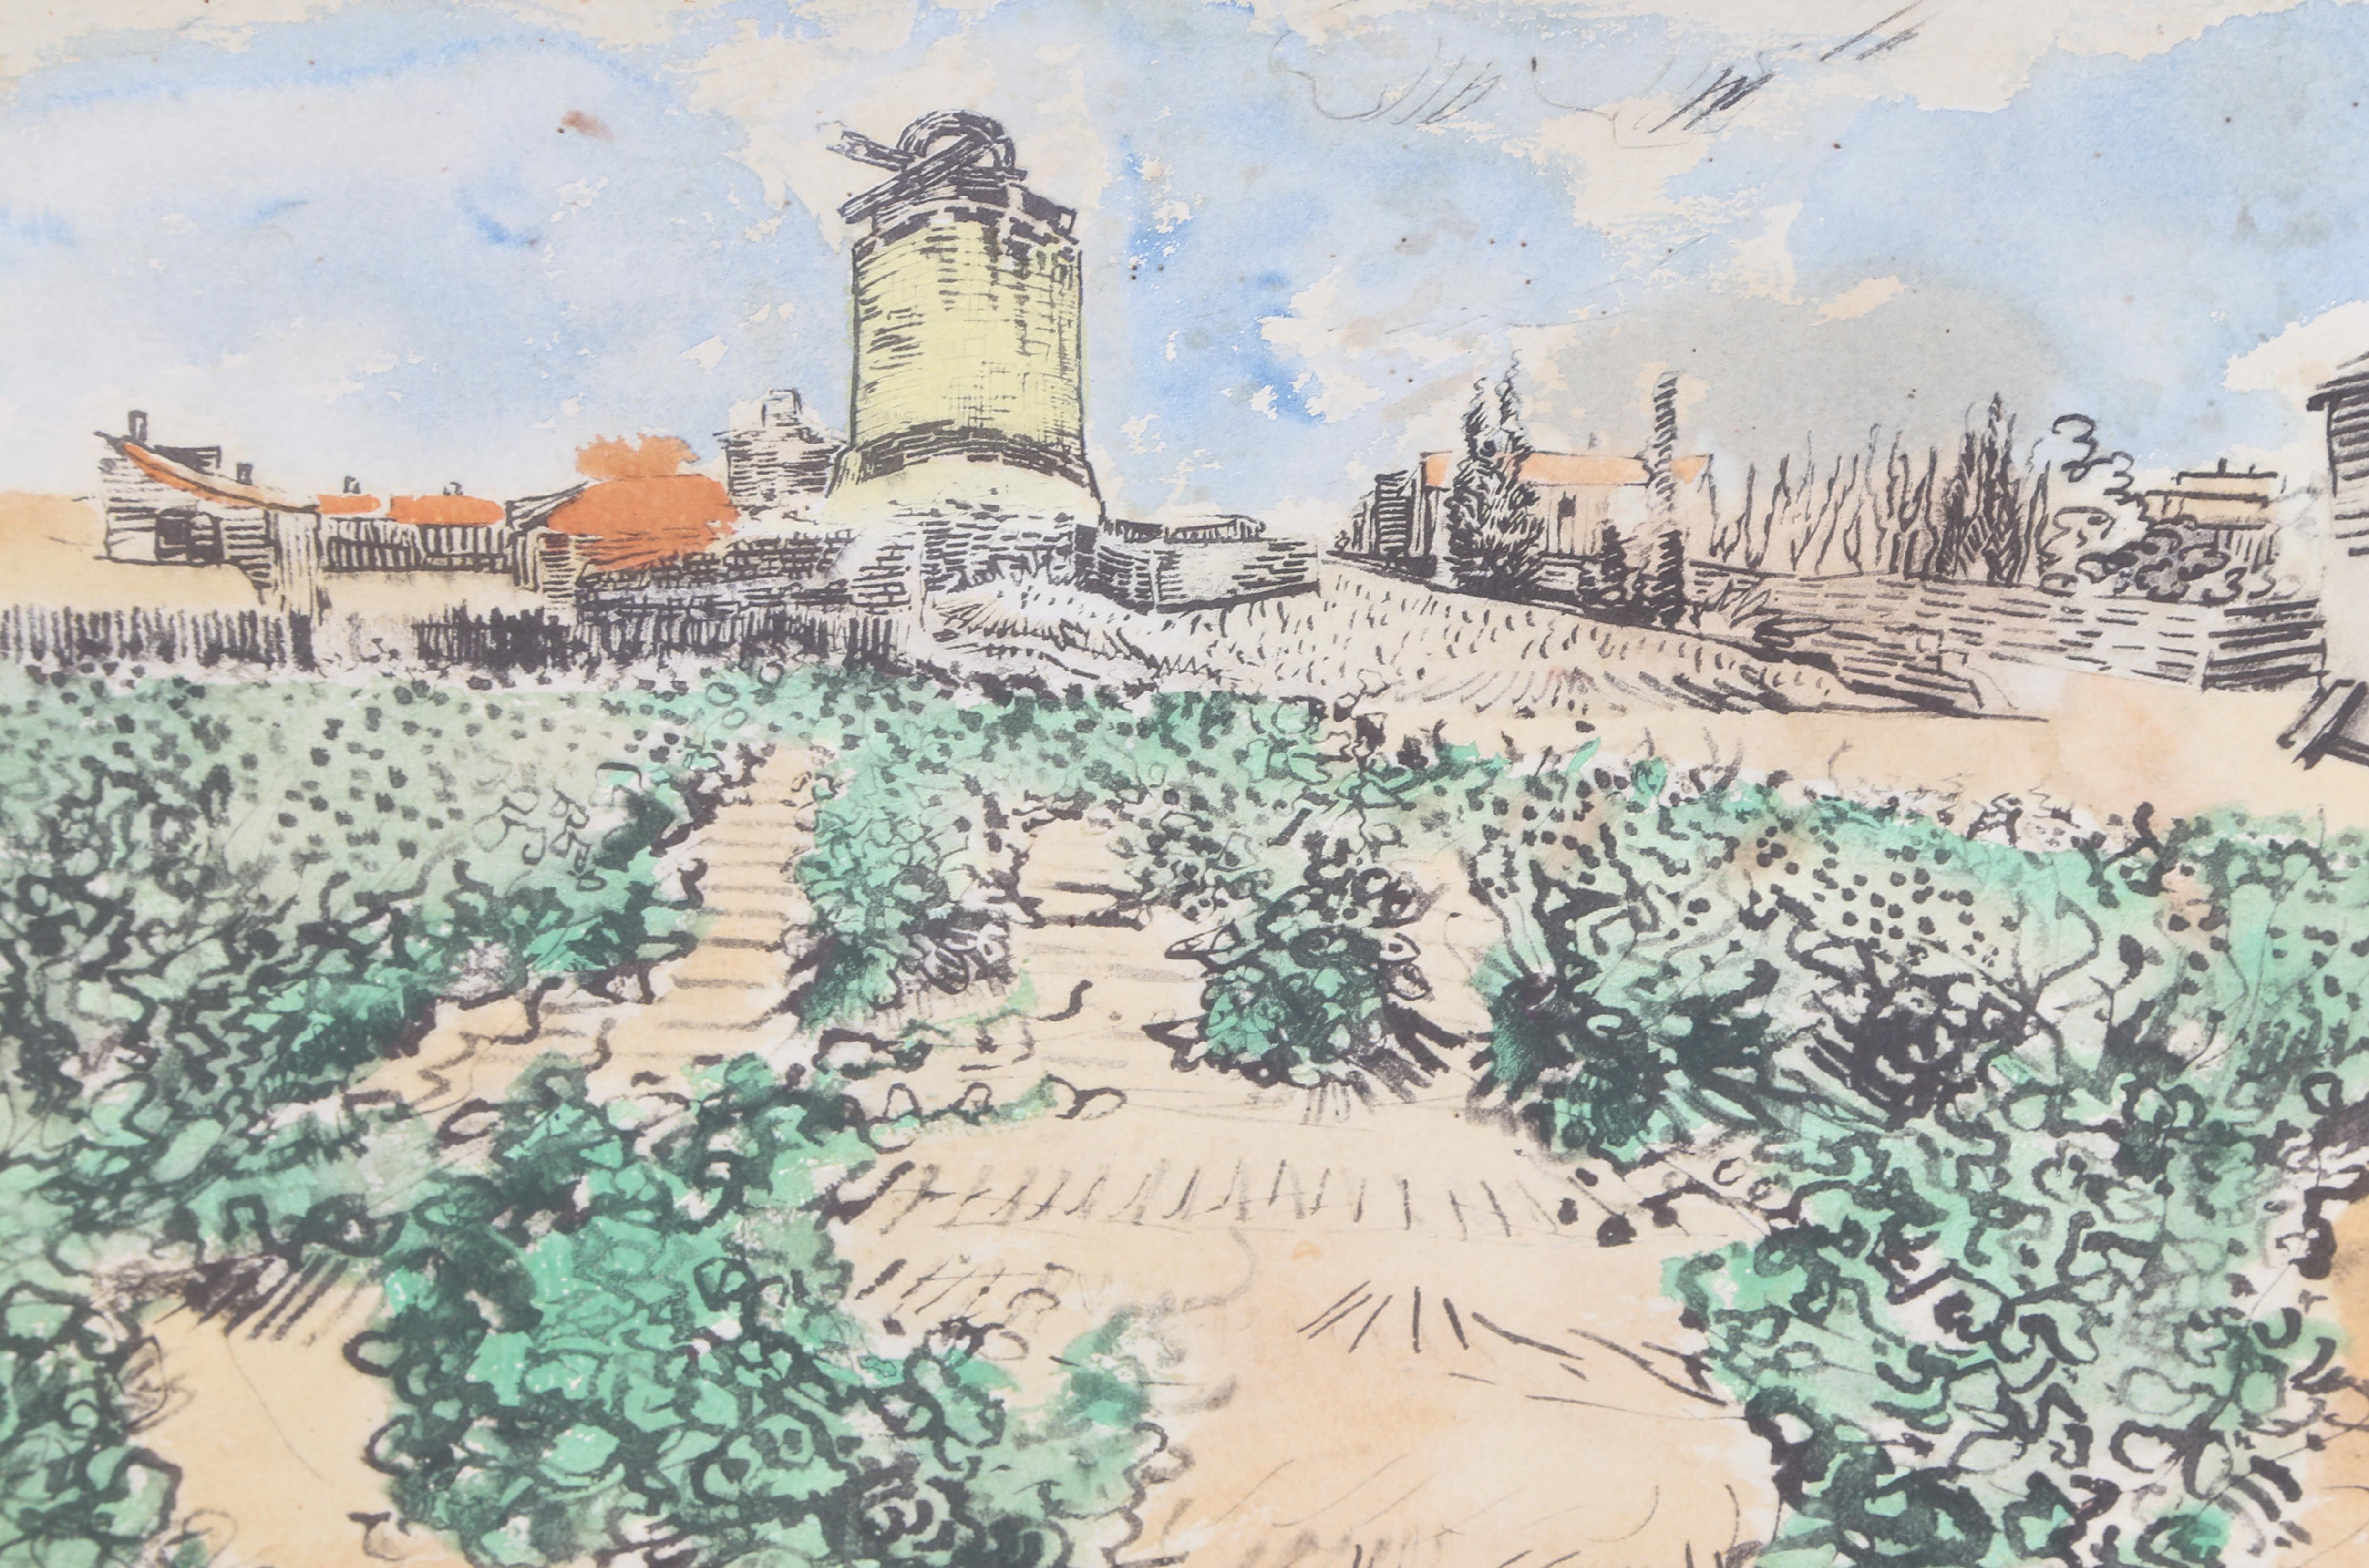 The Mill of Alphonse Daudet at Fontevieille, Lithograph after Vincent van Gogh - Post-Impressionist Print by (After) Vincent van Gogh